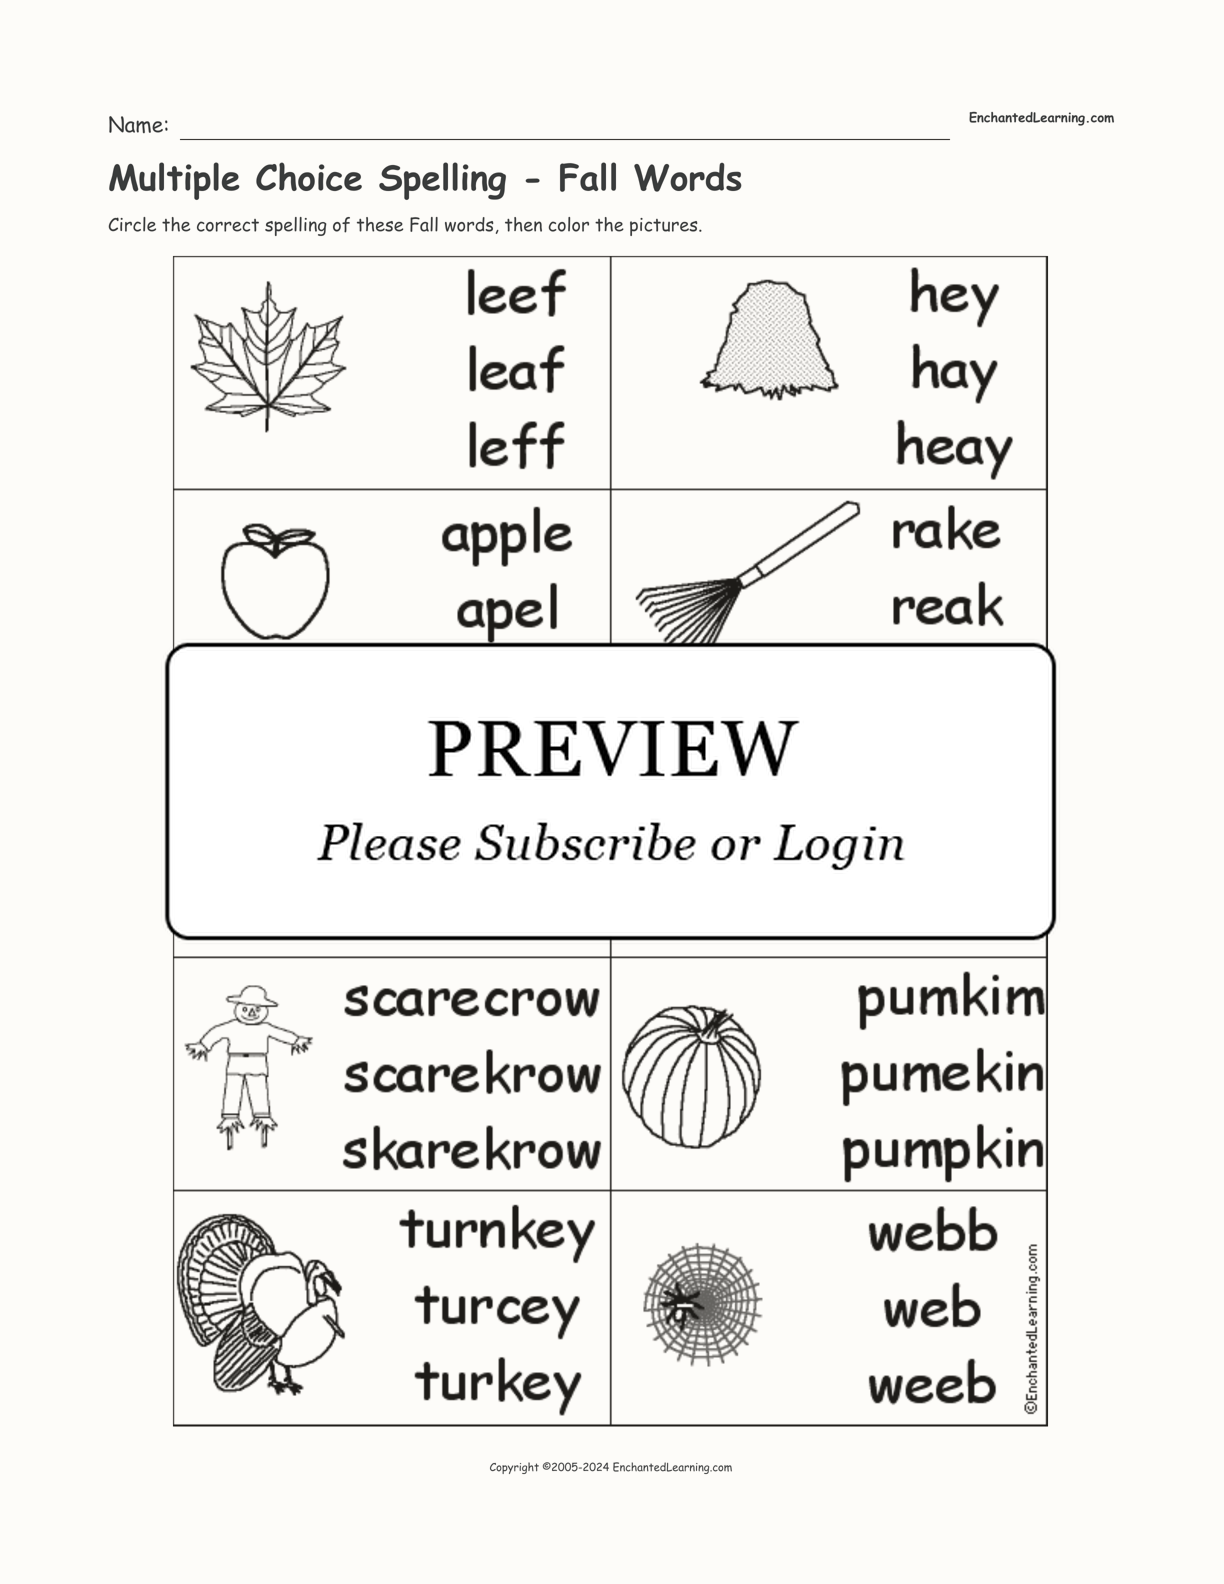 Multiple Choice Spelling Fall Words Enchanted Learning